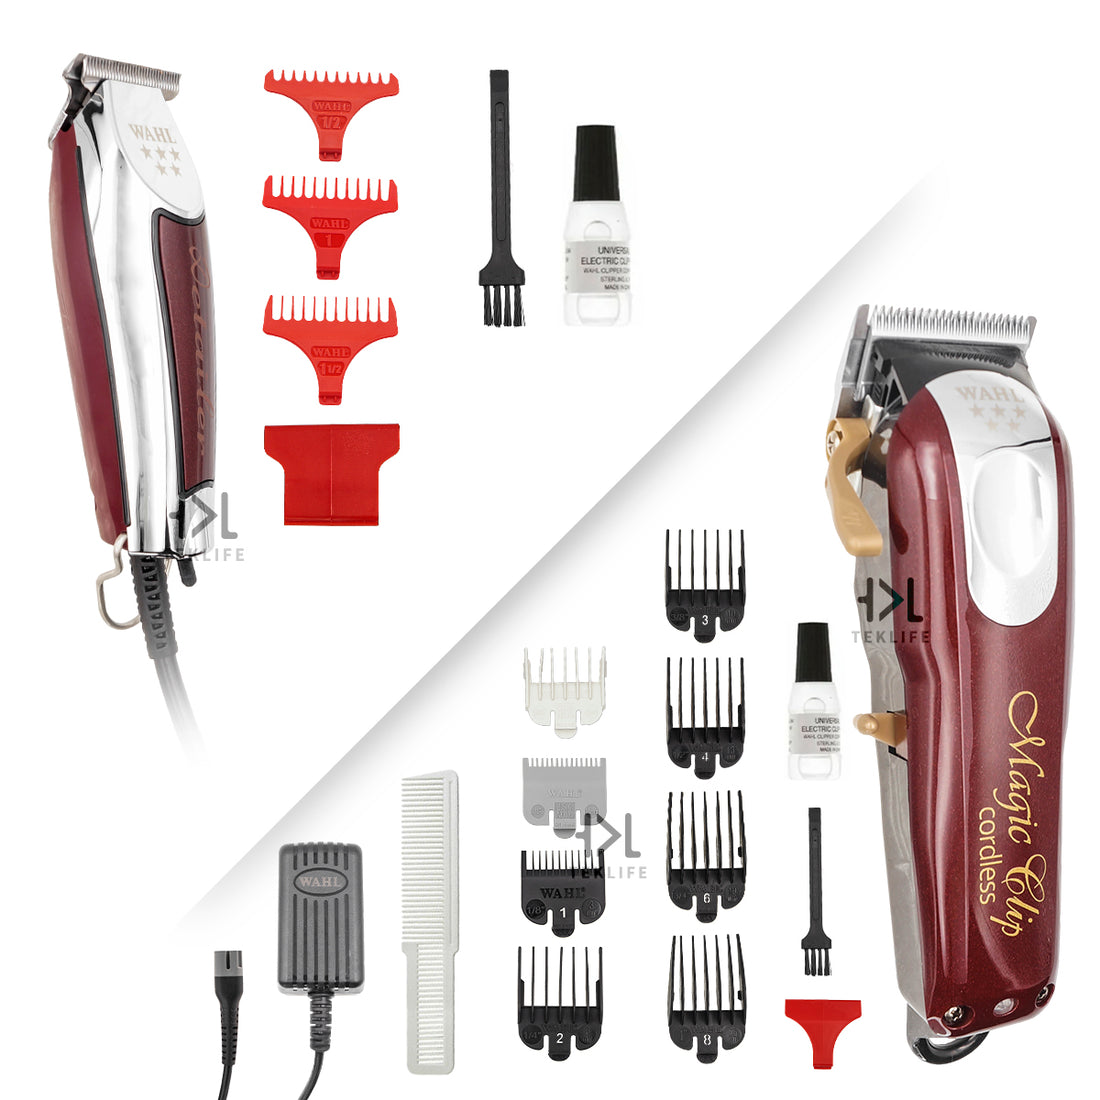 Combo Wahl Profesional Clipper Inalámbrica Magic Clip y Trimmer Detailer